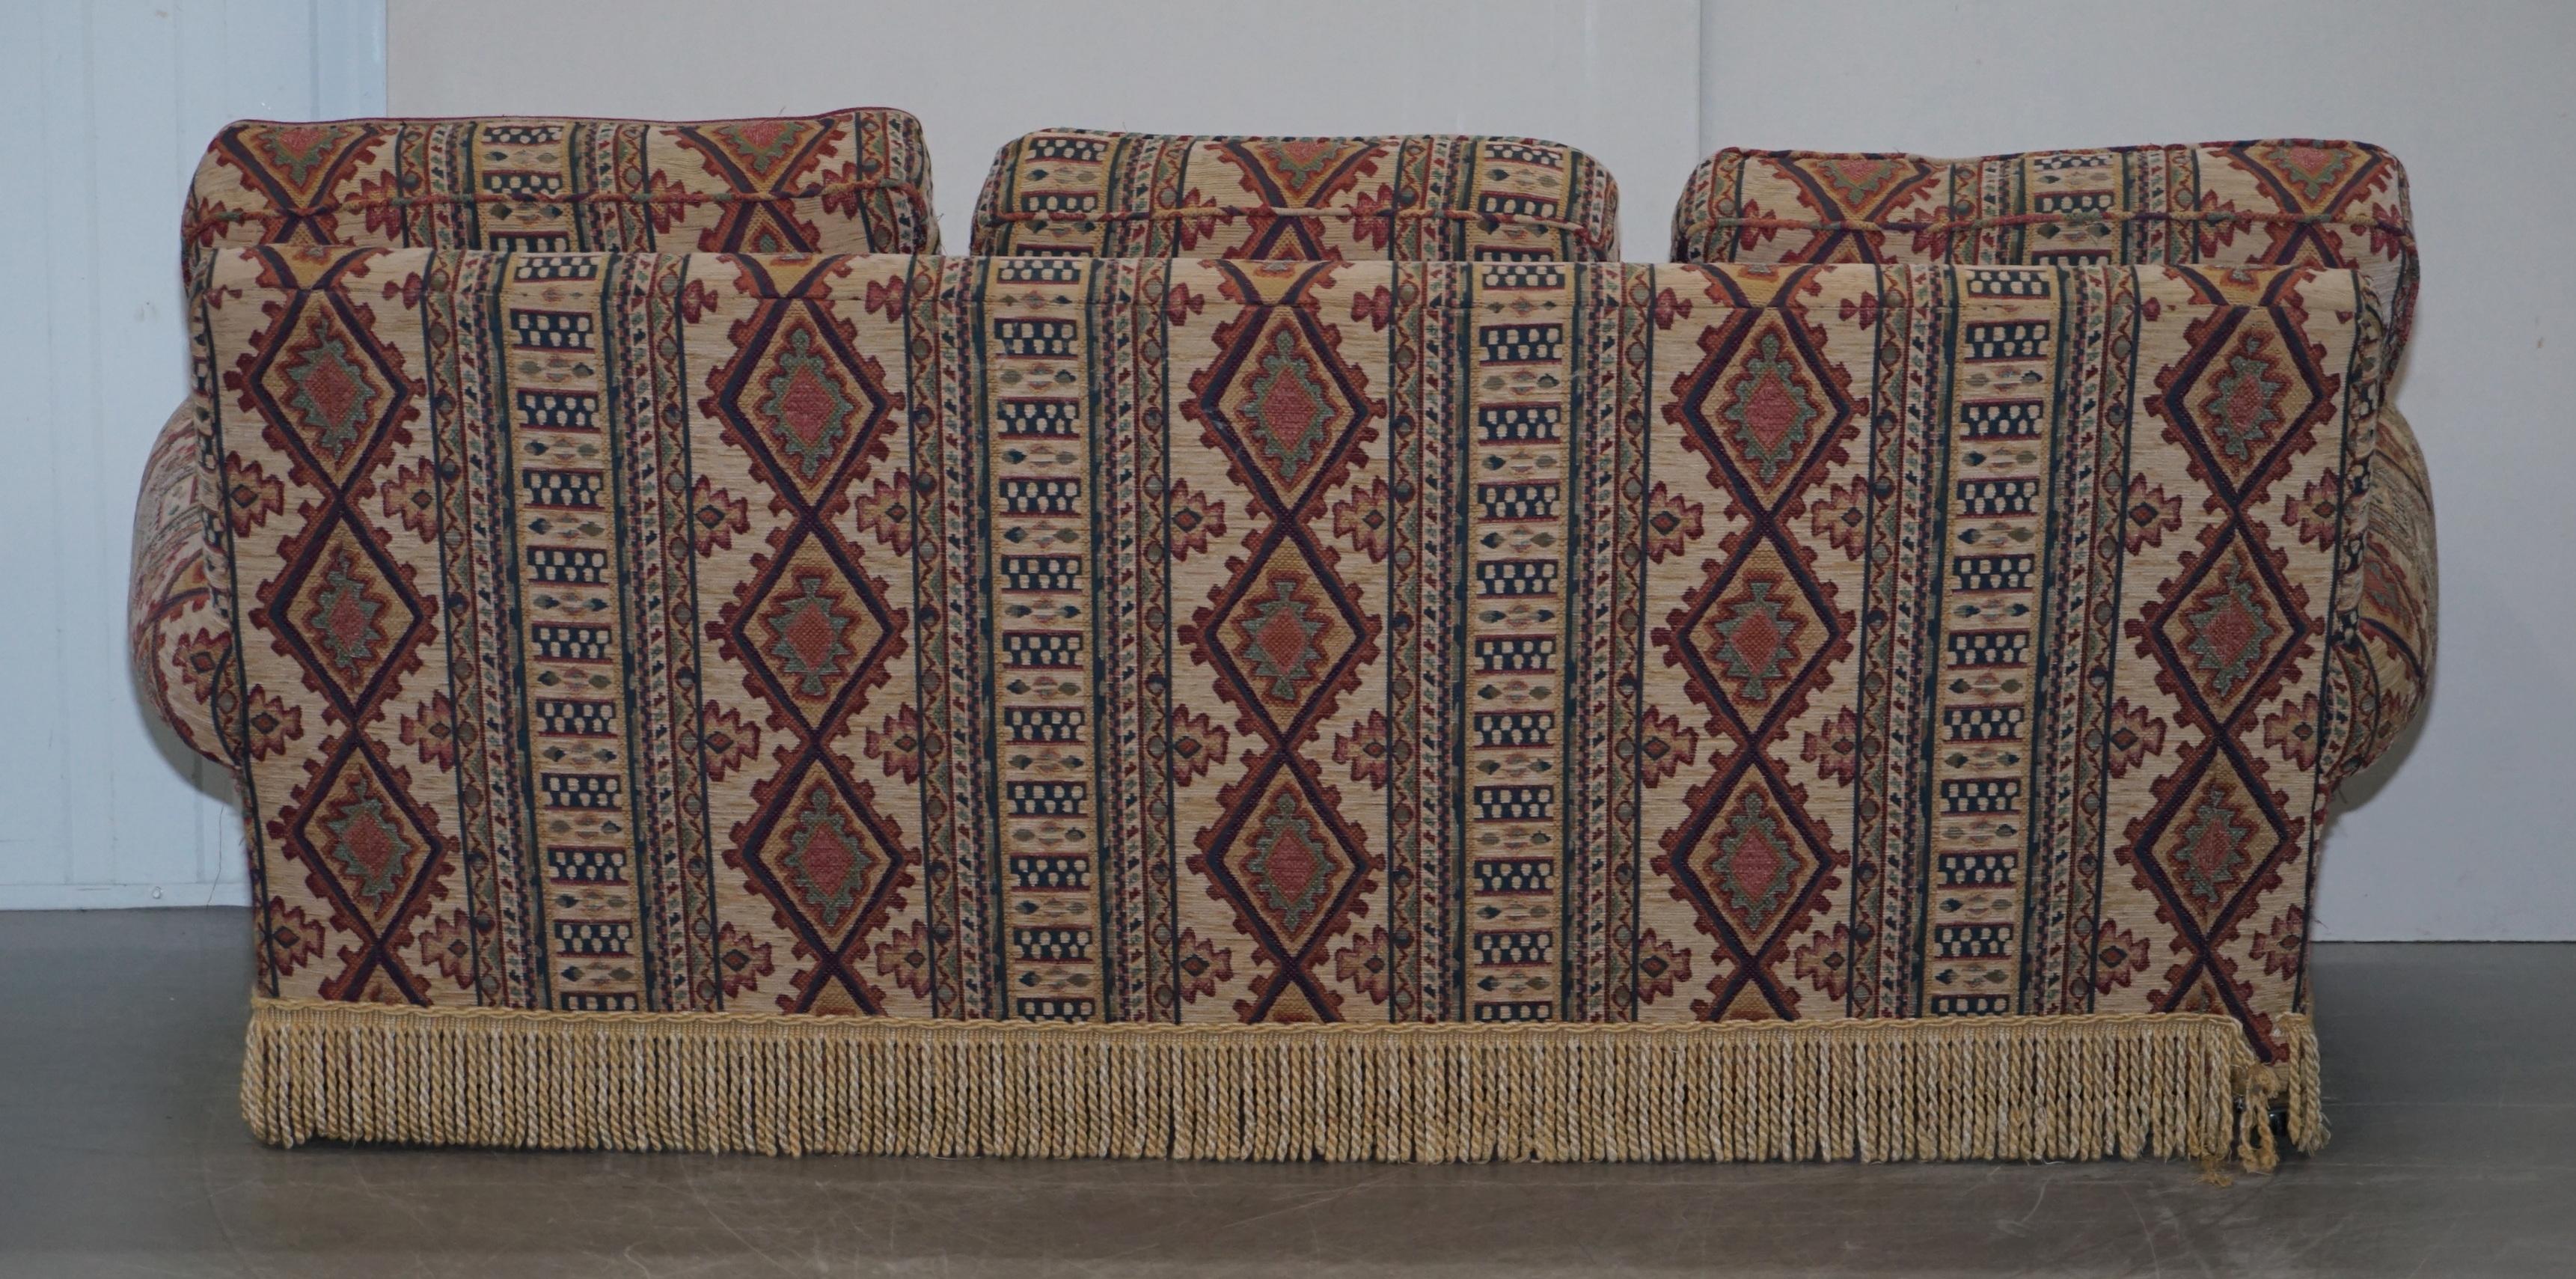 Midcentury Fully Sprung Art Deco Style Kilim Rug Upholstered Sofa Part of Suite For Sale 7